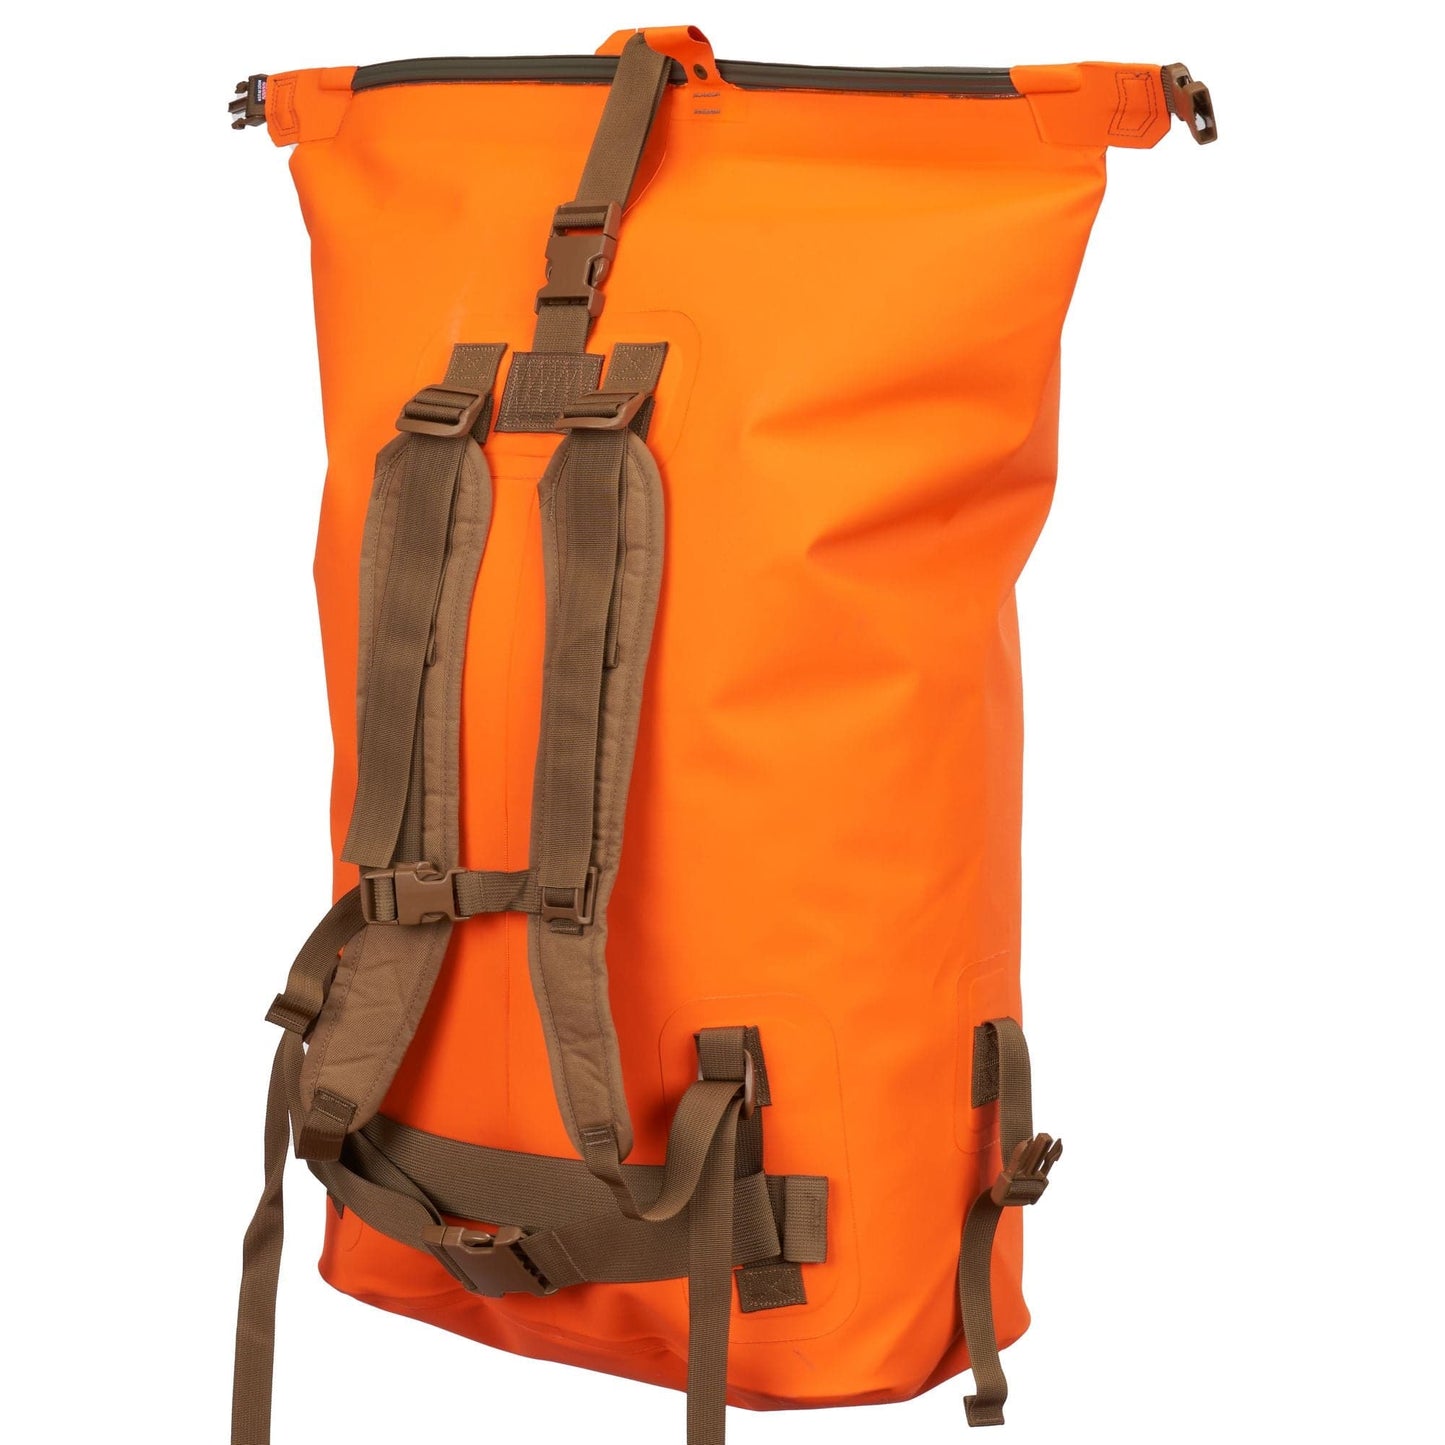 Featuring the Westwater Drypack dry bag manufactured by Watershed shown here from a second angle.